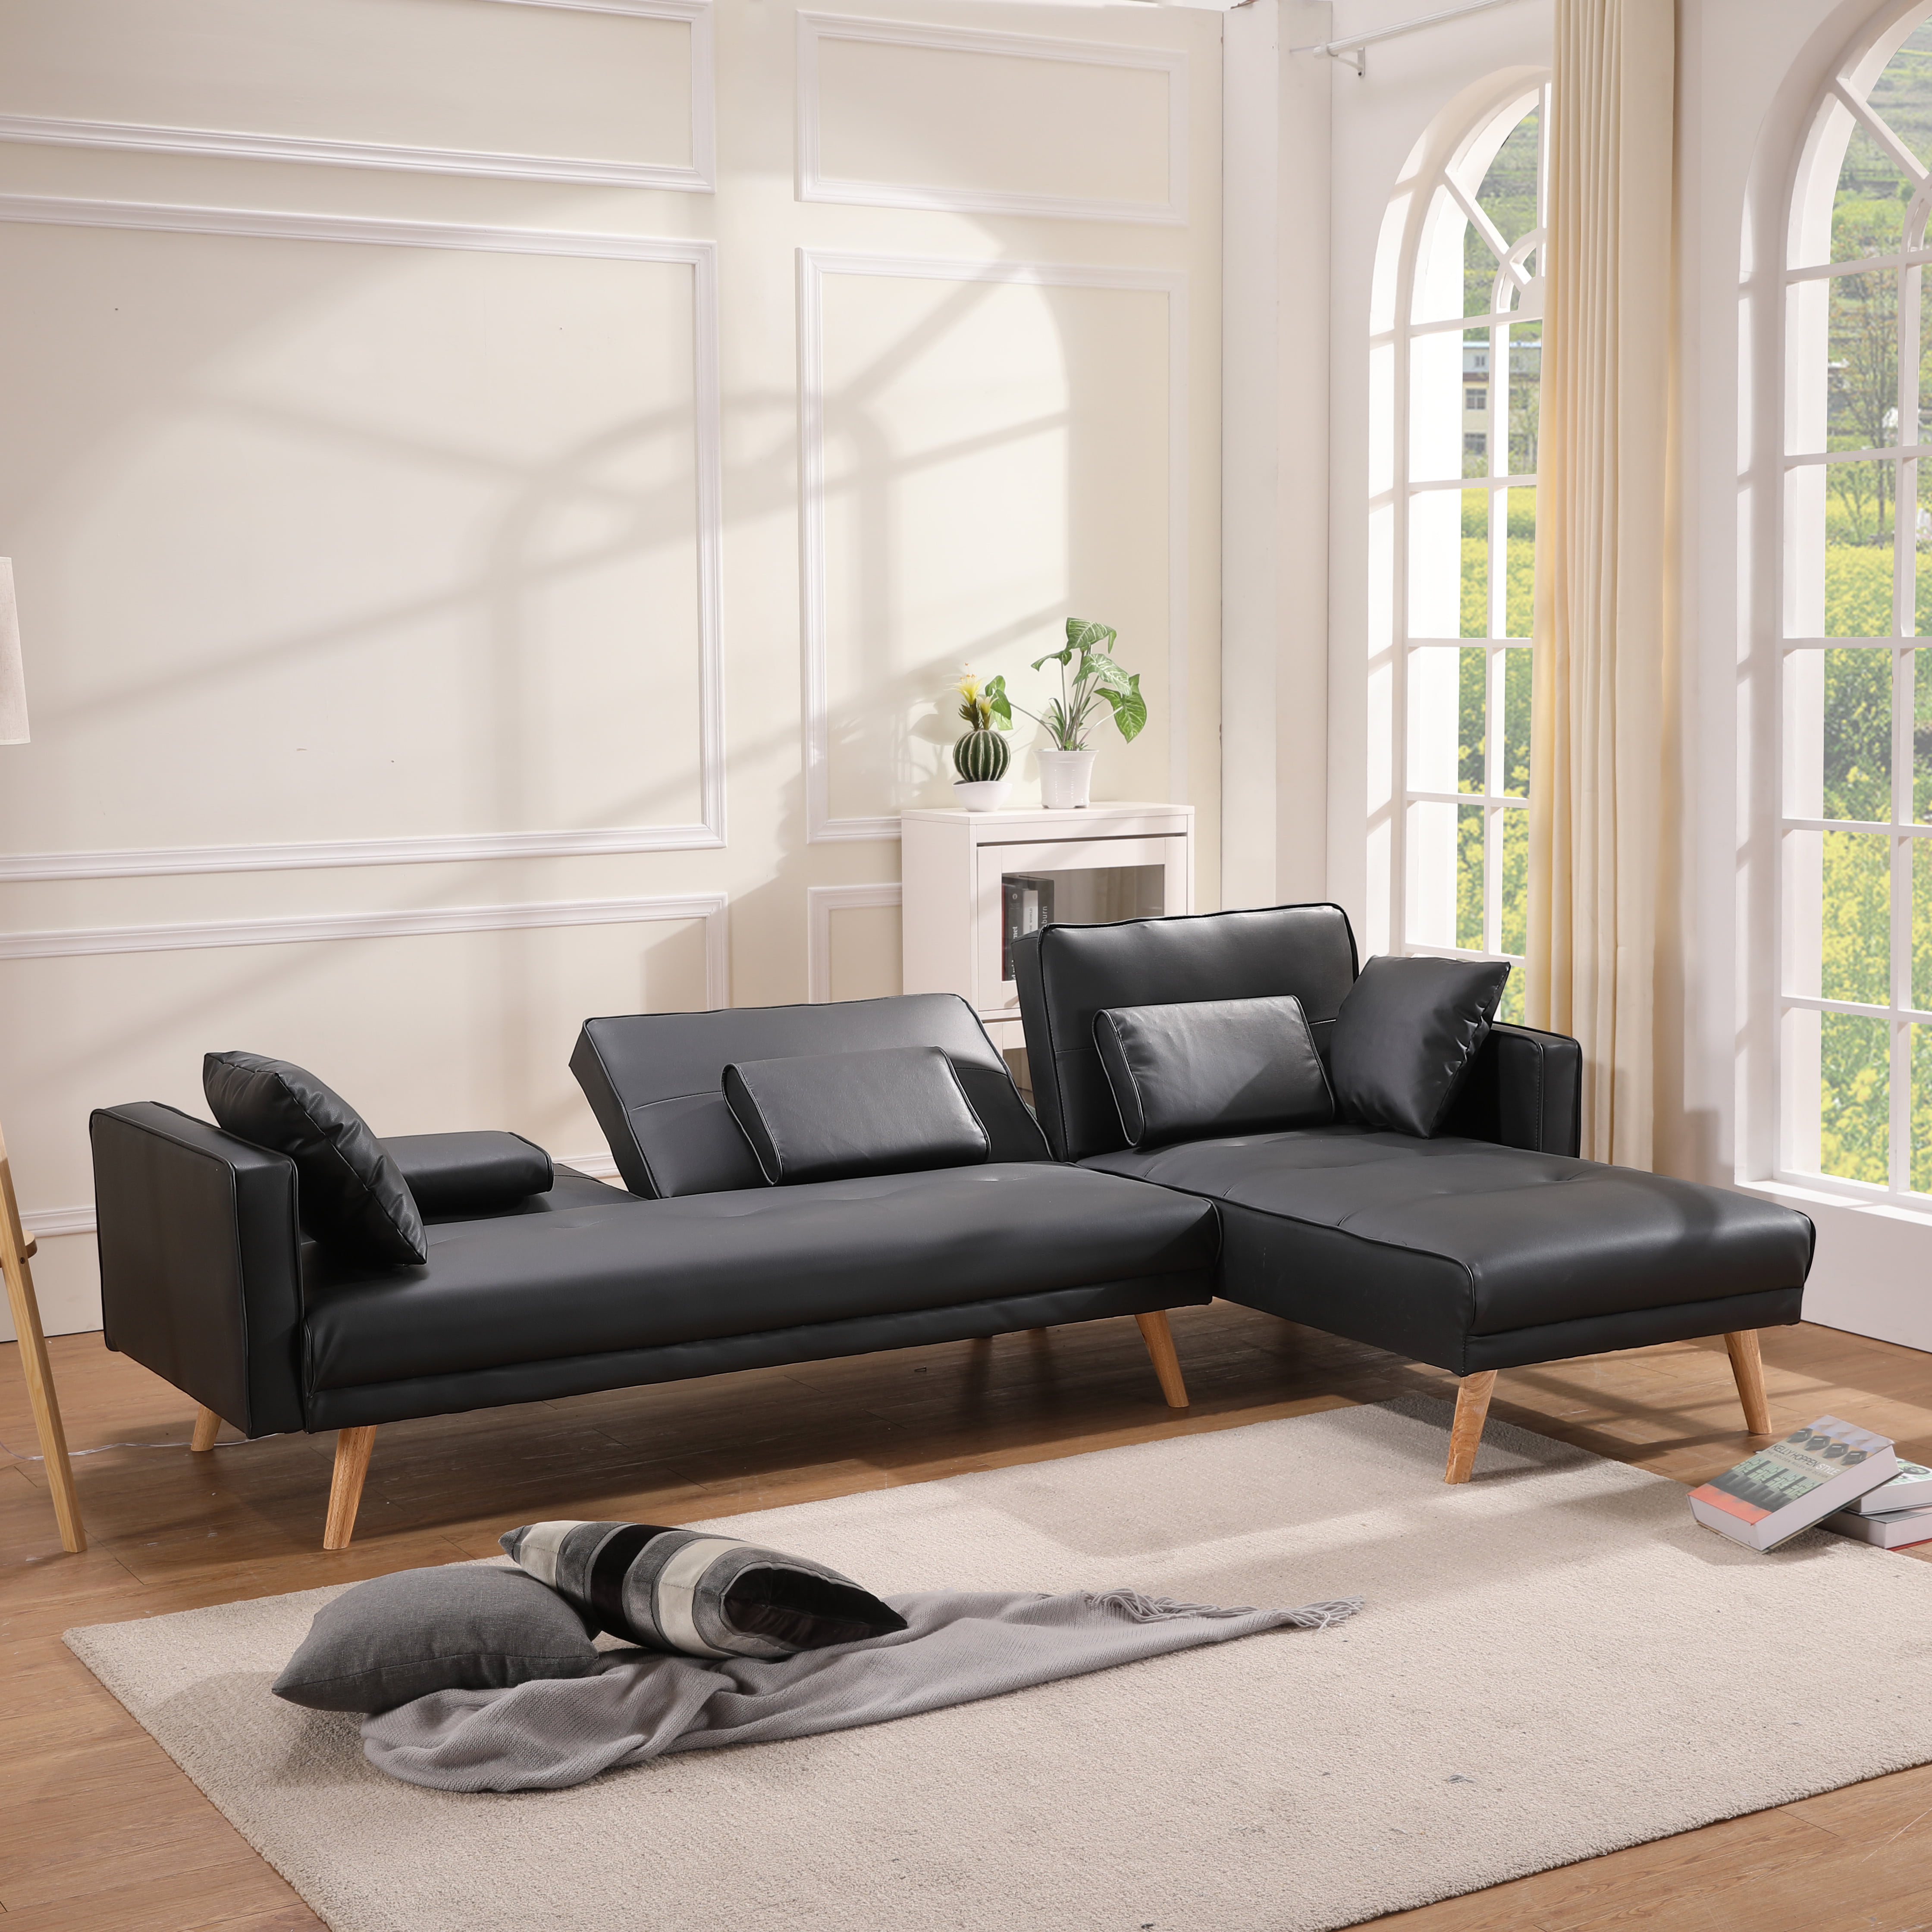 Sofa Design For Hall - Photos All Recommendation